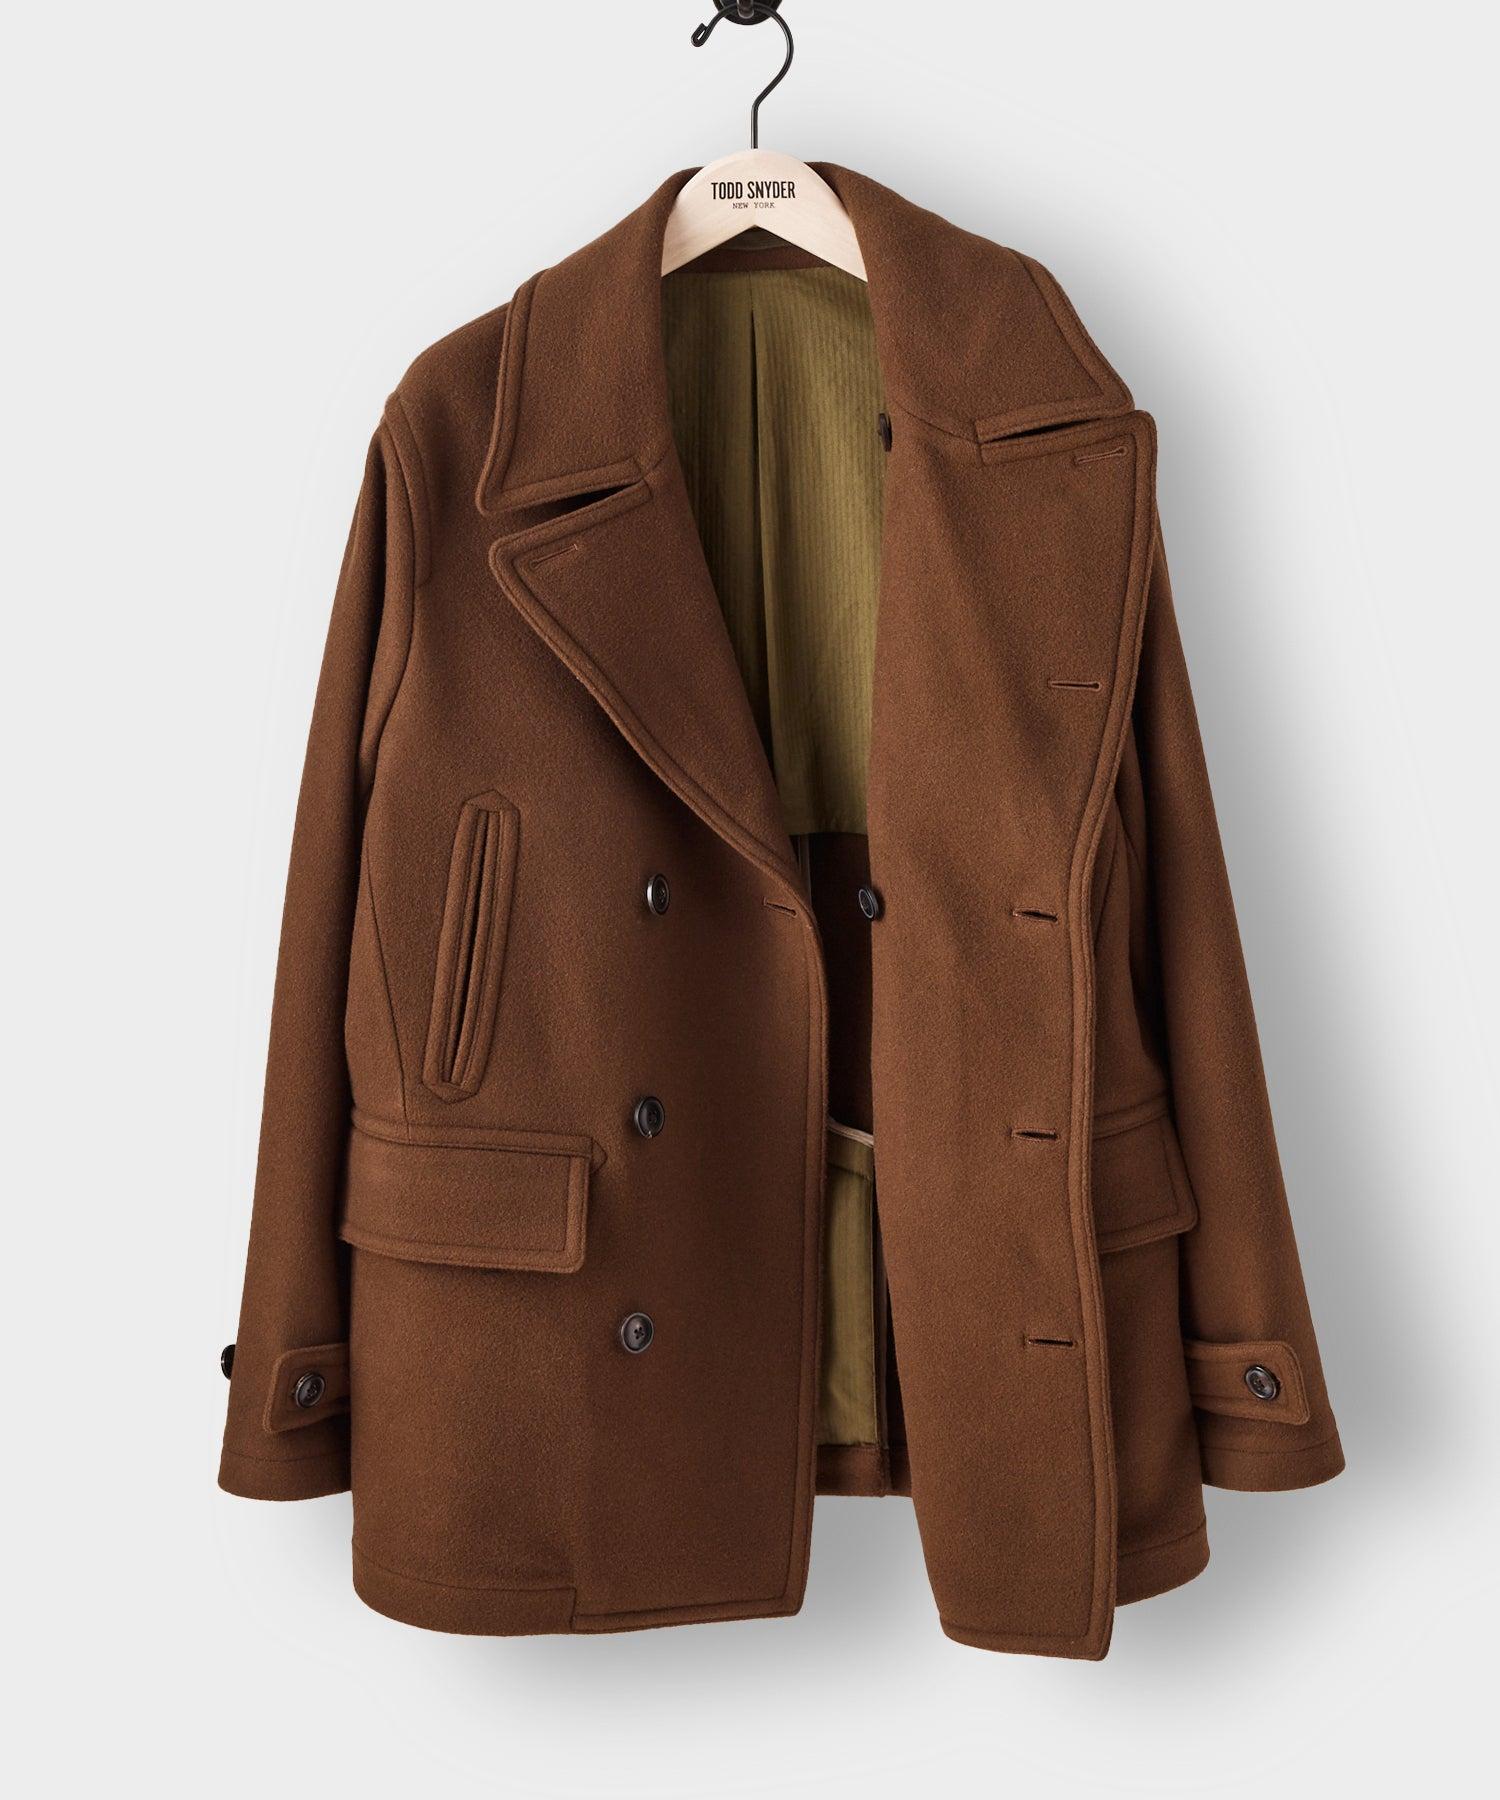 Todd Snyder Italian Wool Cashmere Peacoat in Brown for Men | Lyst UK